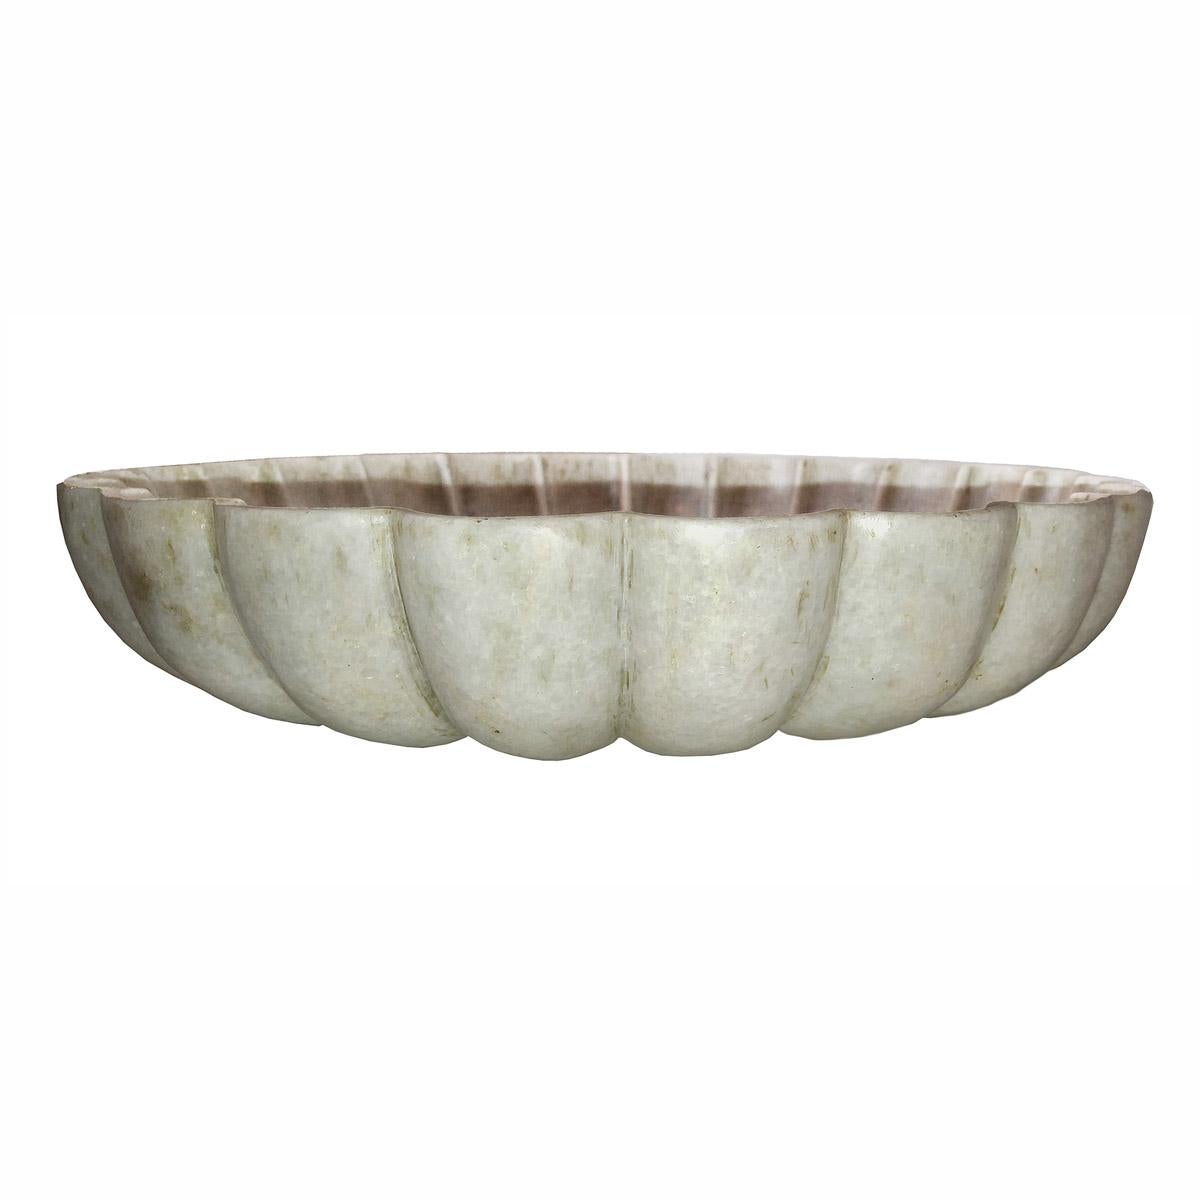 A beautifully carved marble bowl from India, circa 1960. 
18 inches diameter, 3.75 inches high, scalloped pattern. 
An elegant and practical accent for a large table, kitchen counter or outdoor decor.